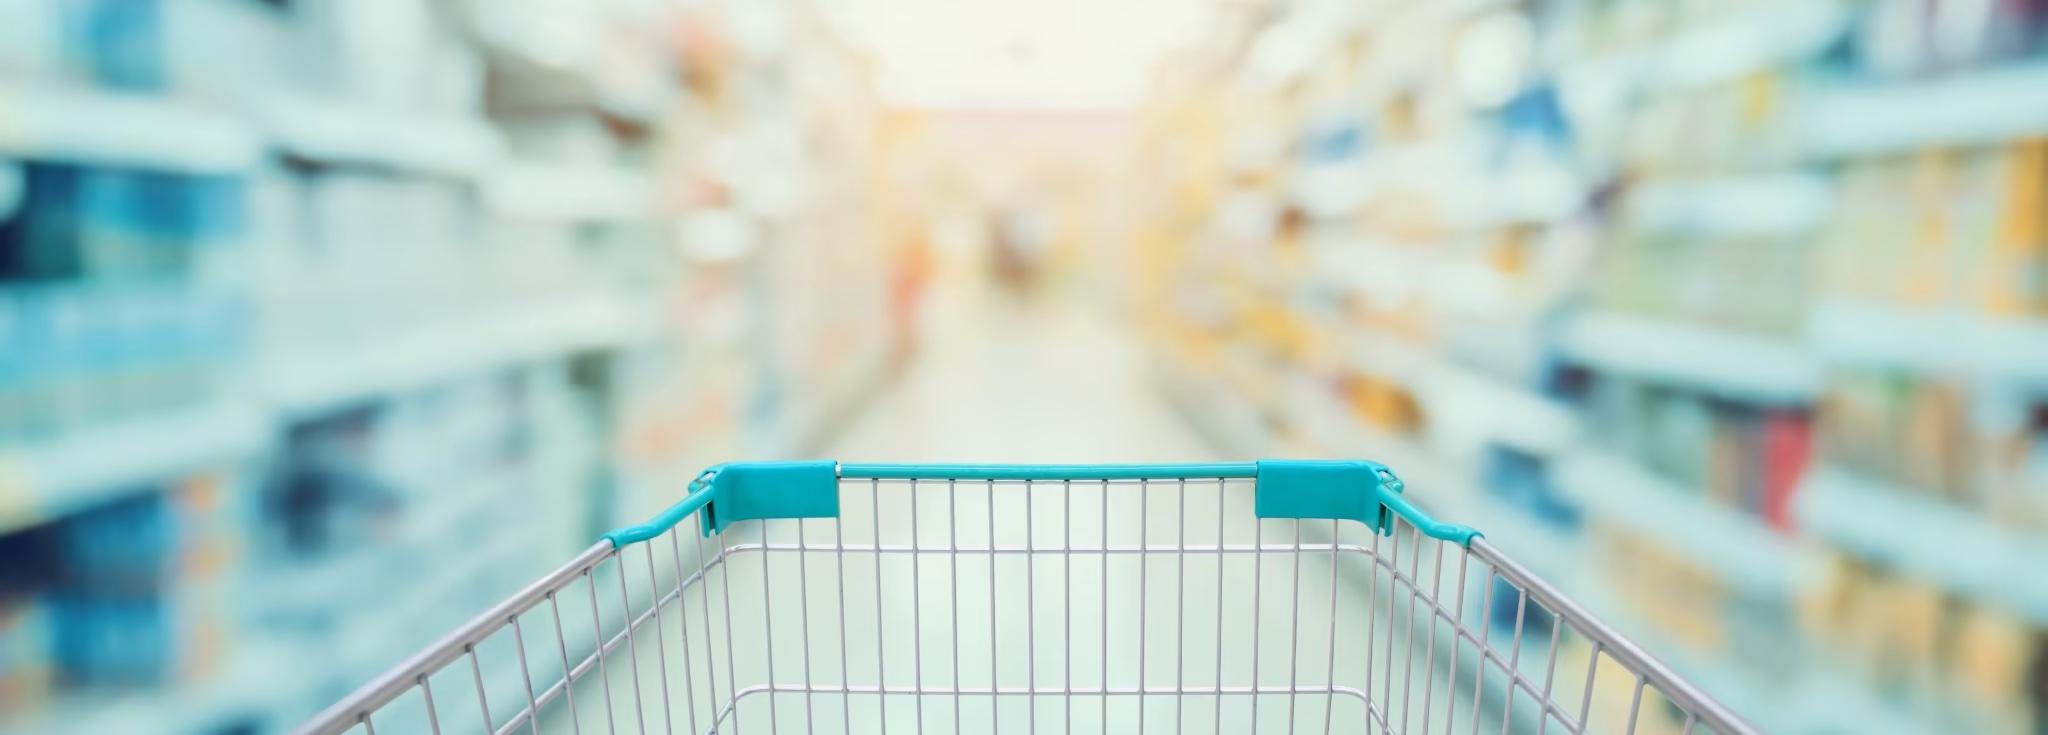 grocery retail store with blurred background and shopping cart going down grocery aisle